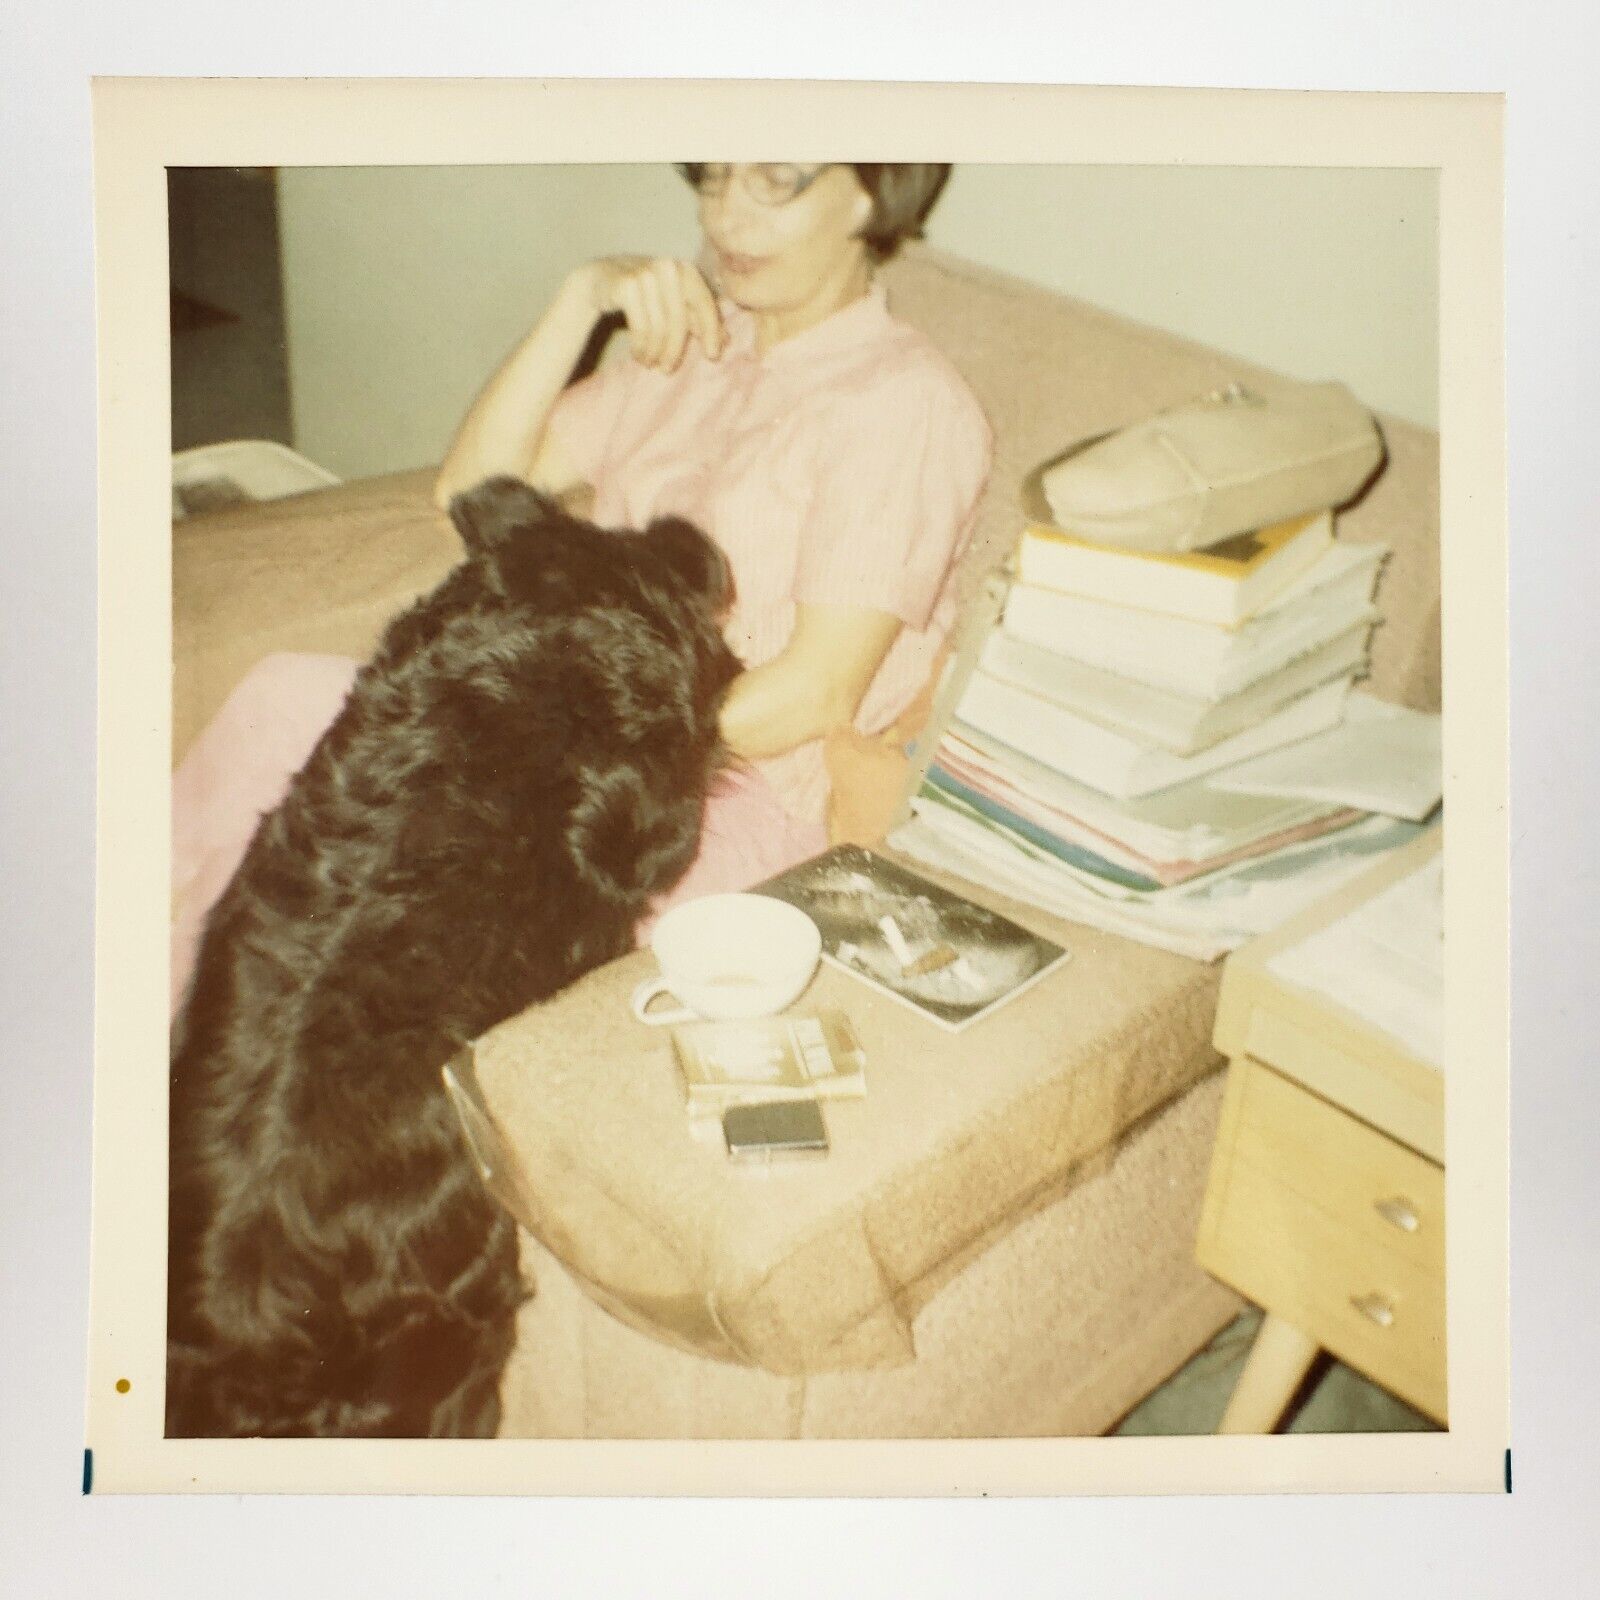 Dog Cuddling Armchair Lady Photo 1960s Stack of Books Cocaine Mirror Pet A4267